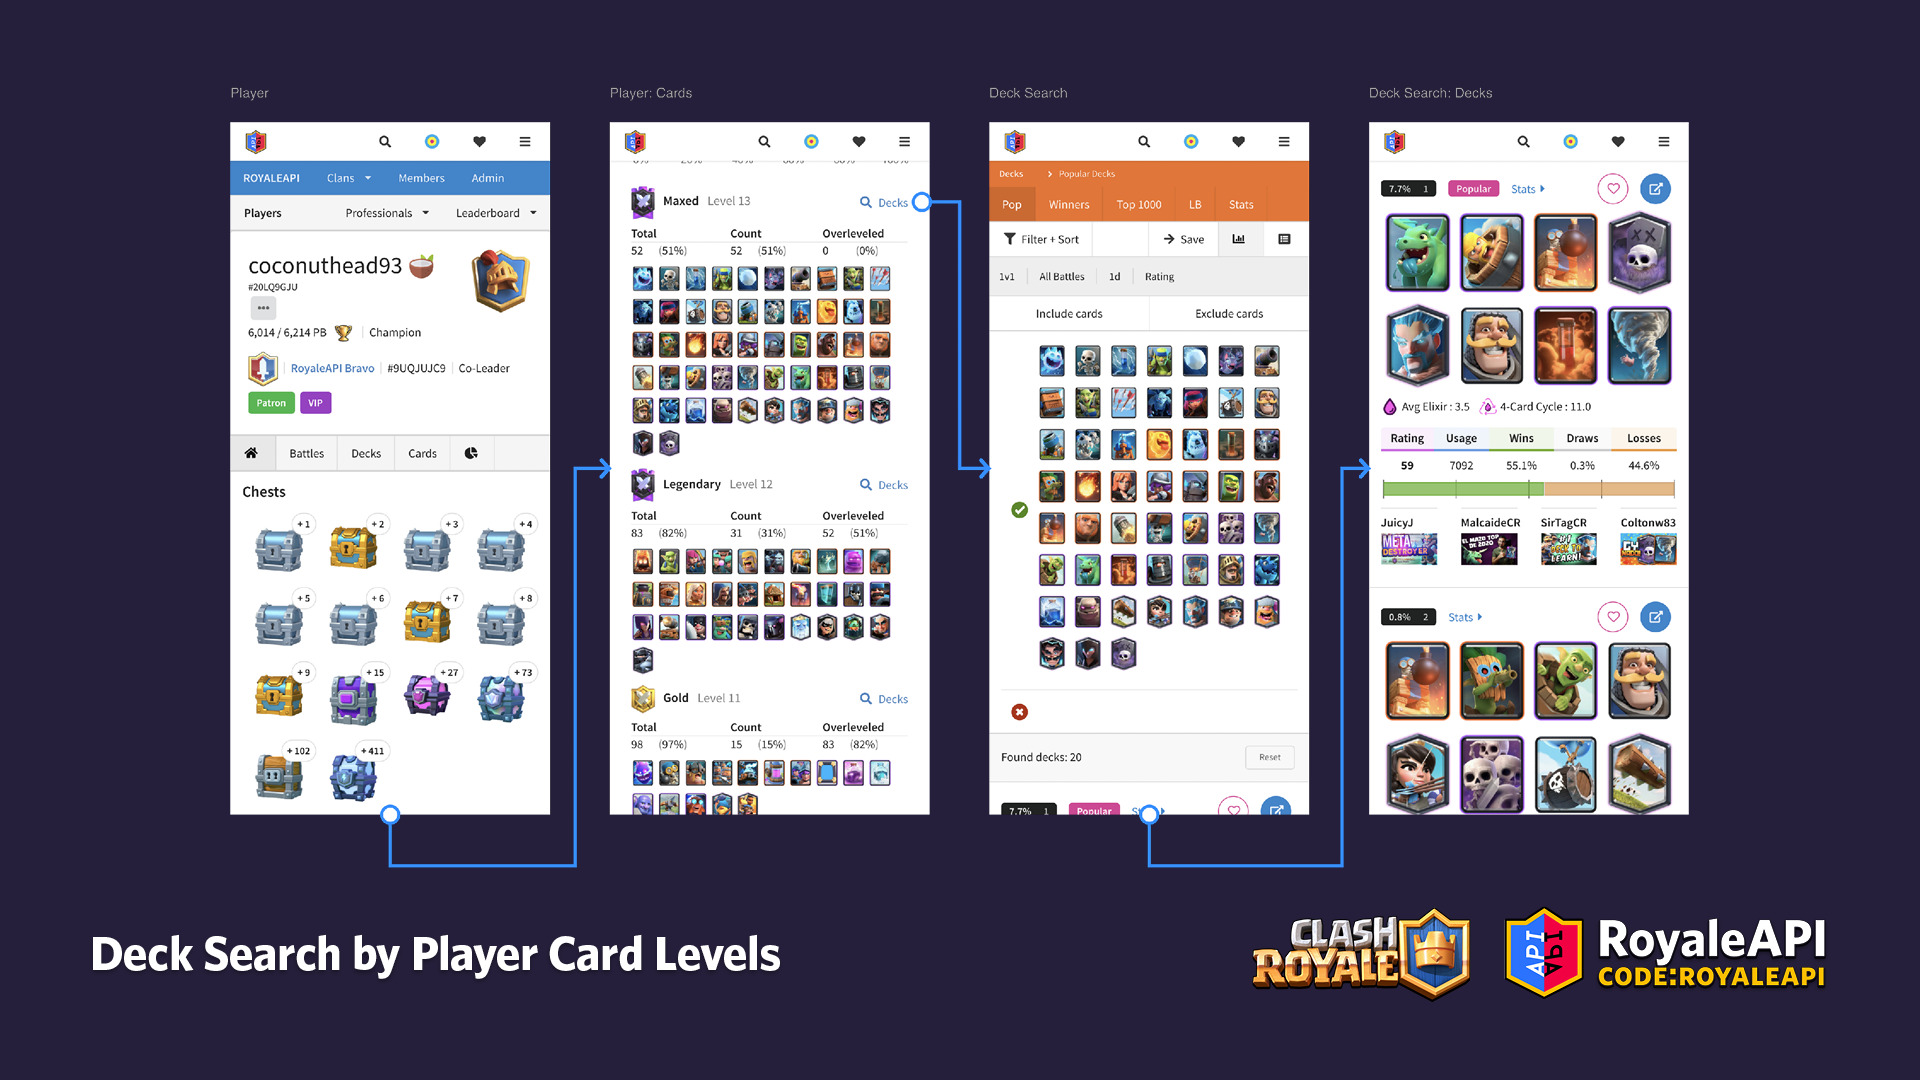 Search for decks by player card levels